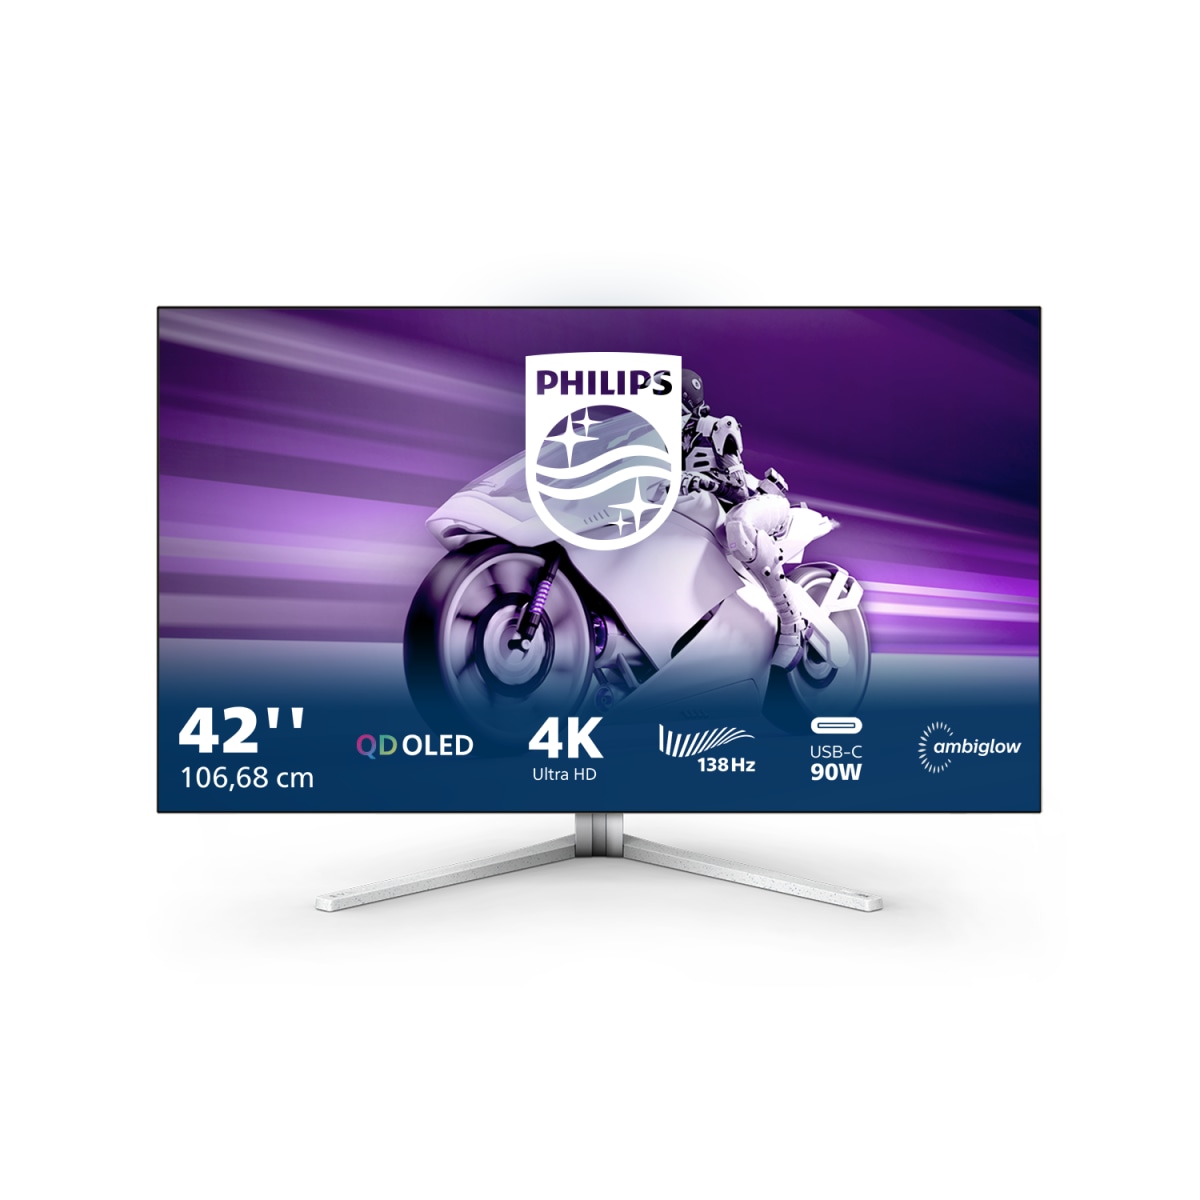 Philips Evnia 42" 42M2N8900 3840x2160 OLED 138Hz 0.1ms A-Sync HDR Widescreen Gaming Monitor